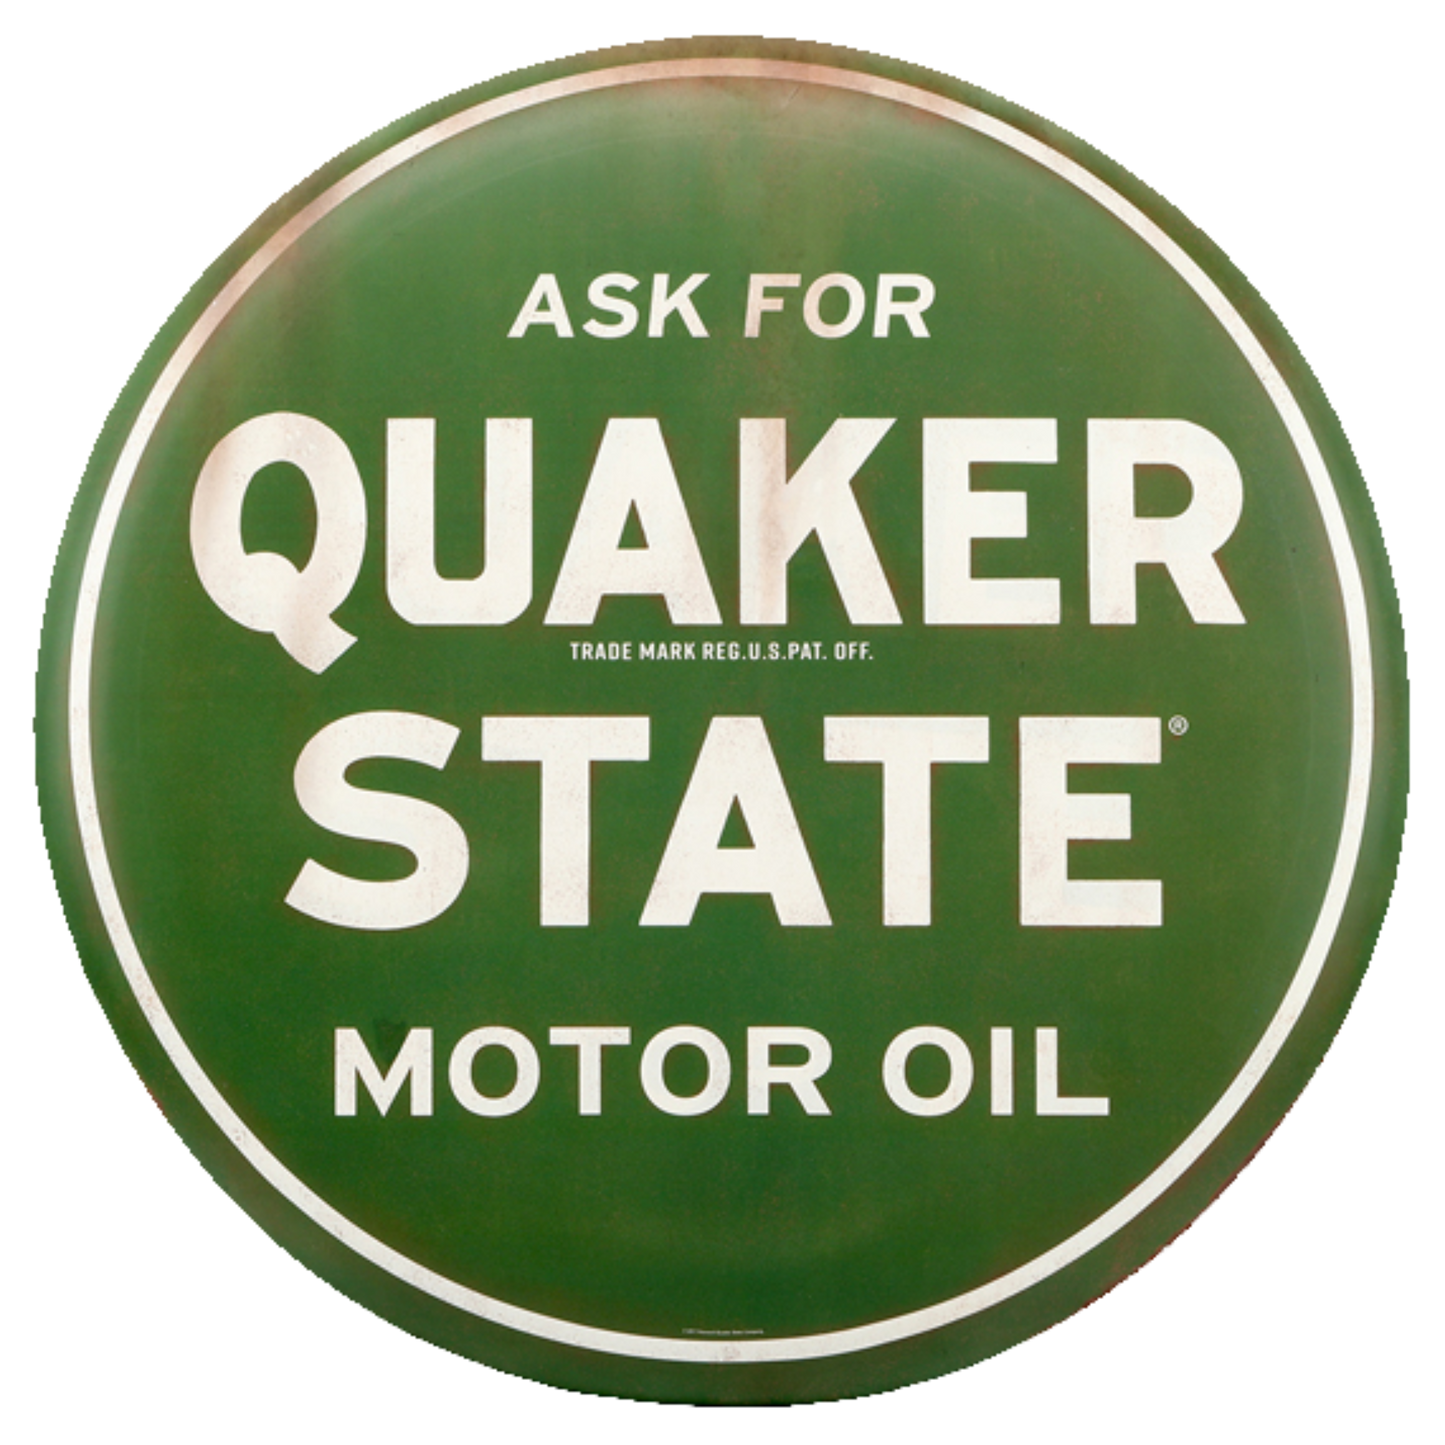 Round green metal sign featuring the Quaker State Motor Oil logo and the words "Ask for Quaker State."